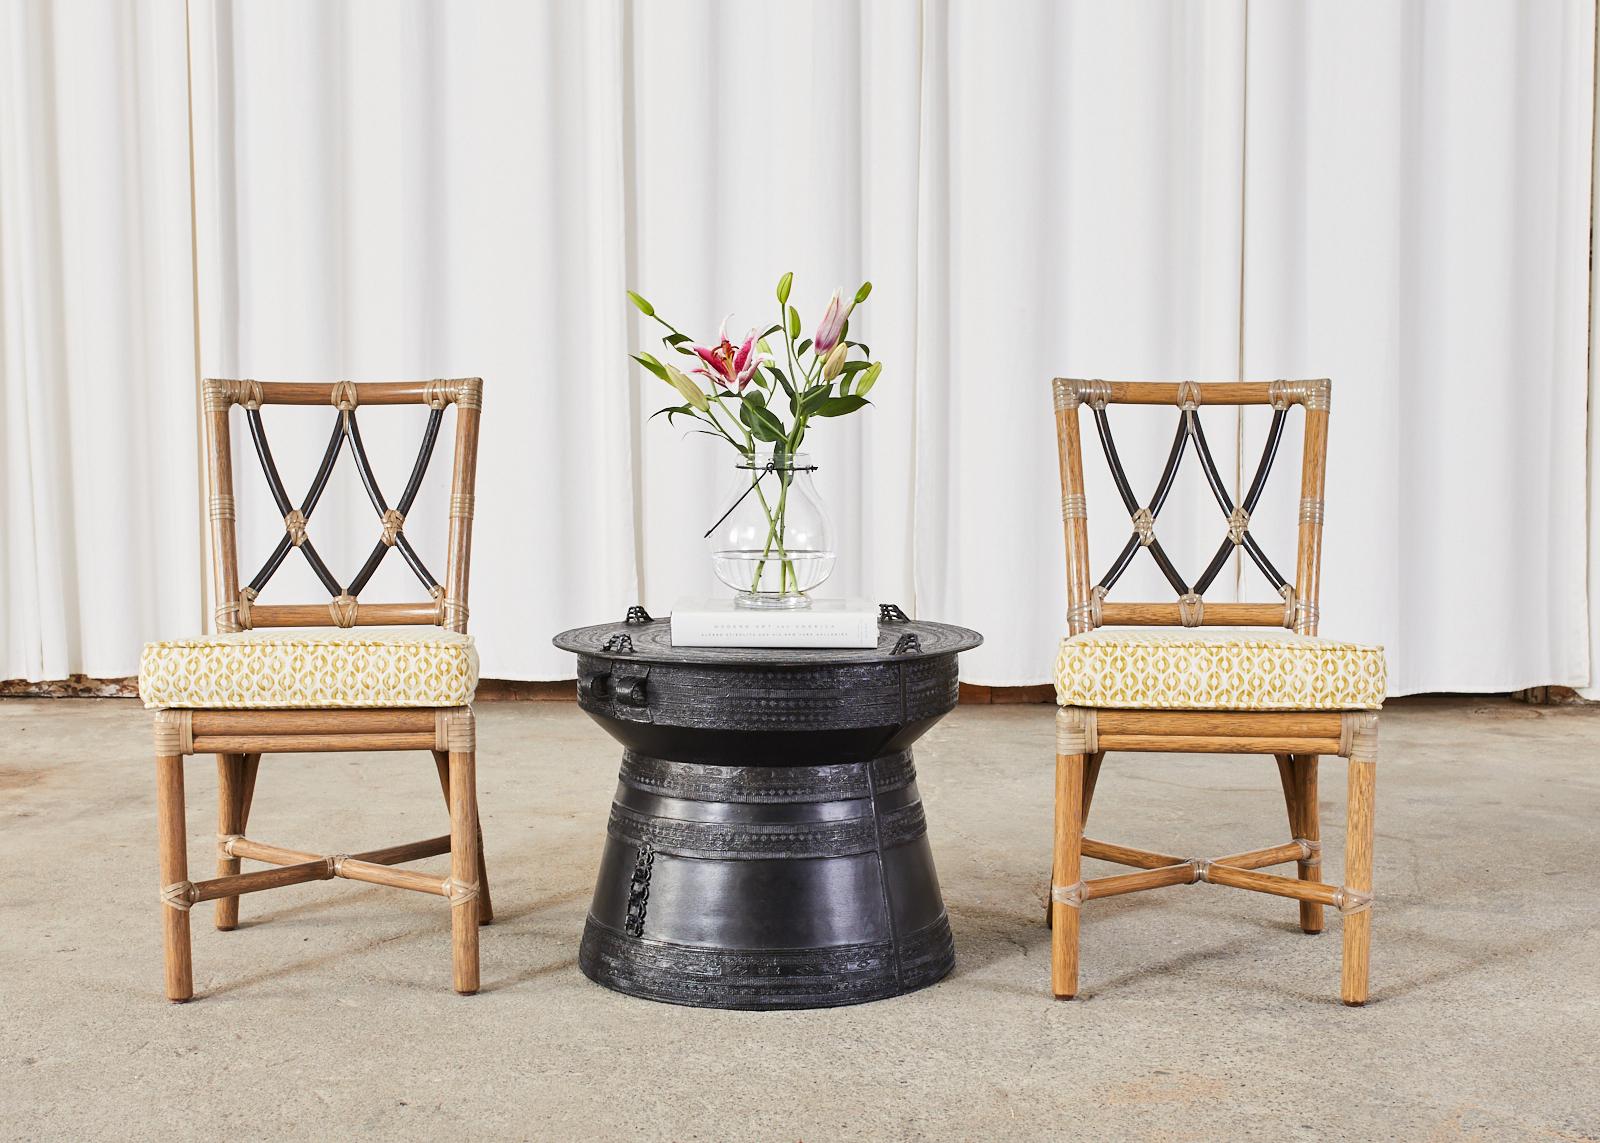 Organic modern pair of rattan dining chairs made by McGuire known as Pixley chairs model #MCJSC17. The chairs feature a narrow frame crafted from thick rattan poles. The square back splat is decorated with a pair of x-motifs in ebonized finishes.